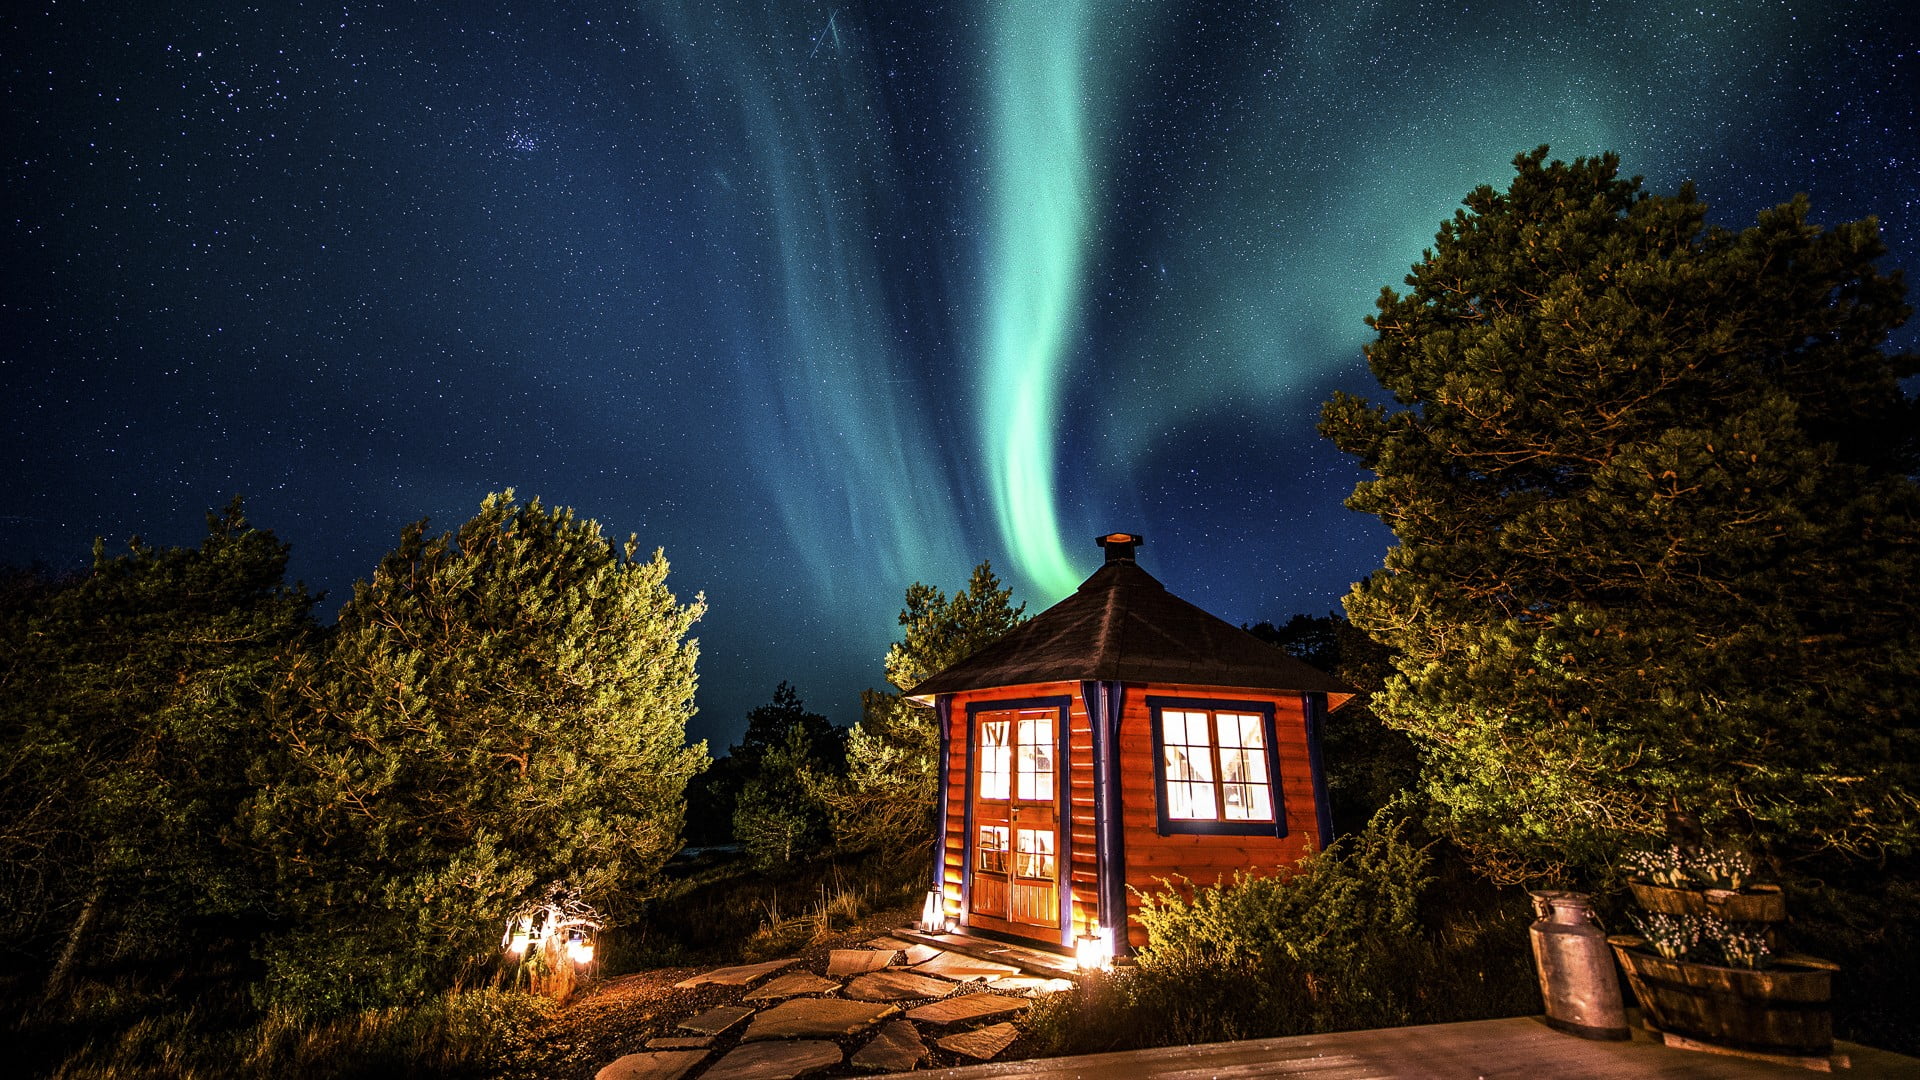 red wooden shed, house, aurorae, tree, plant, night, architecture